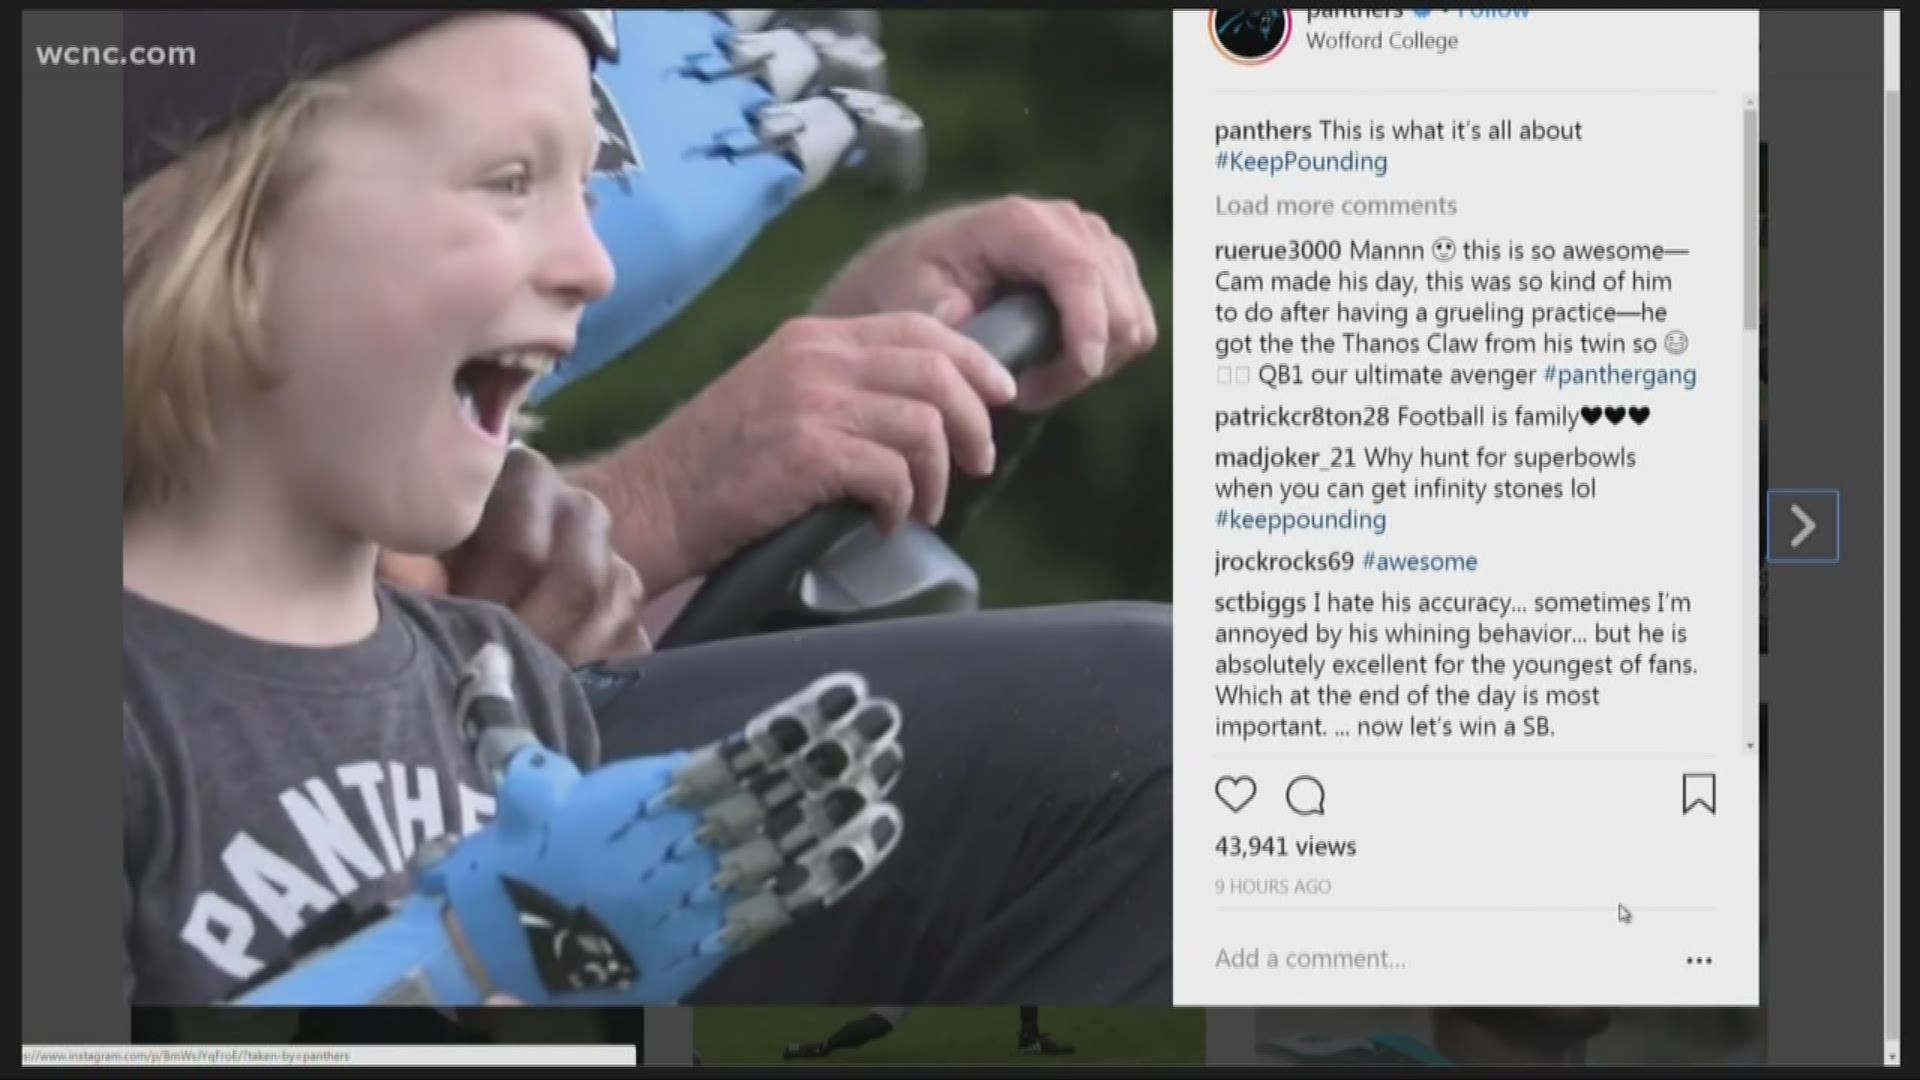 The best story out of Panthers training camp didn't involve a touchdown or a tackle. Instead, QB Cam Newton met his 5-year-old "twin" who gave him a very special gift.